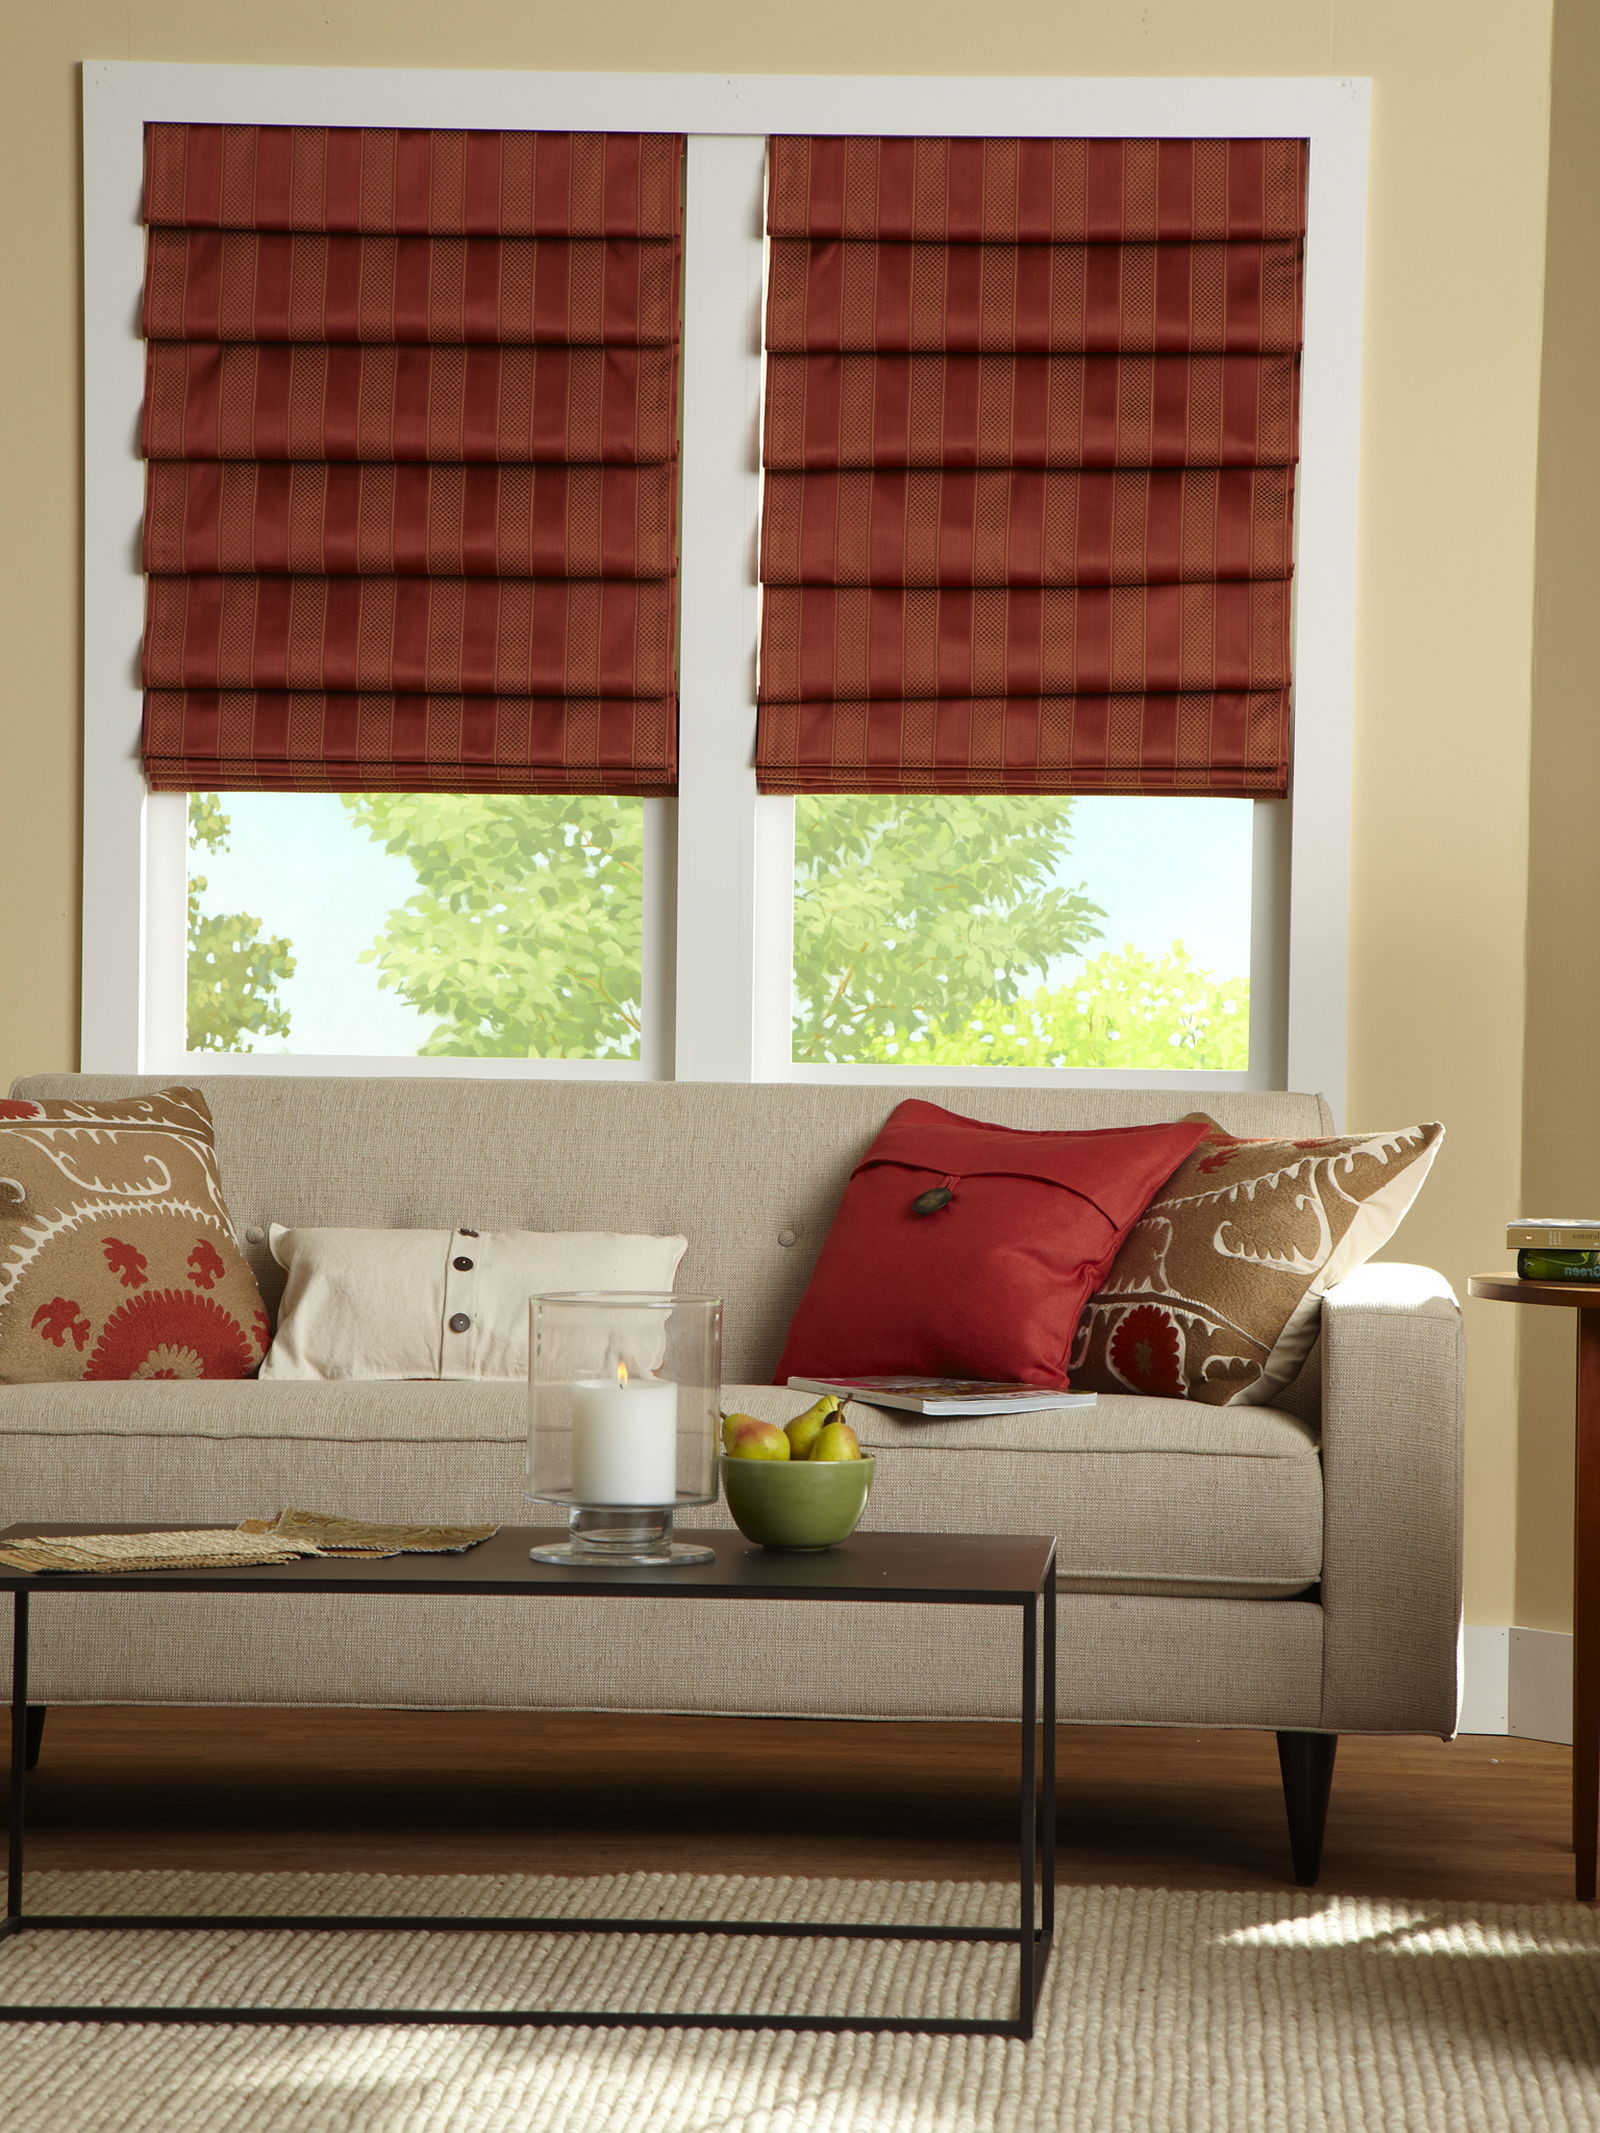 Living Room Curtains Design
 Living Room Curtains the best photos of curtains design